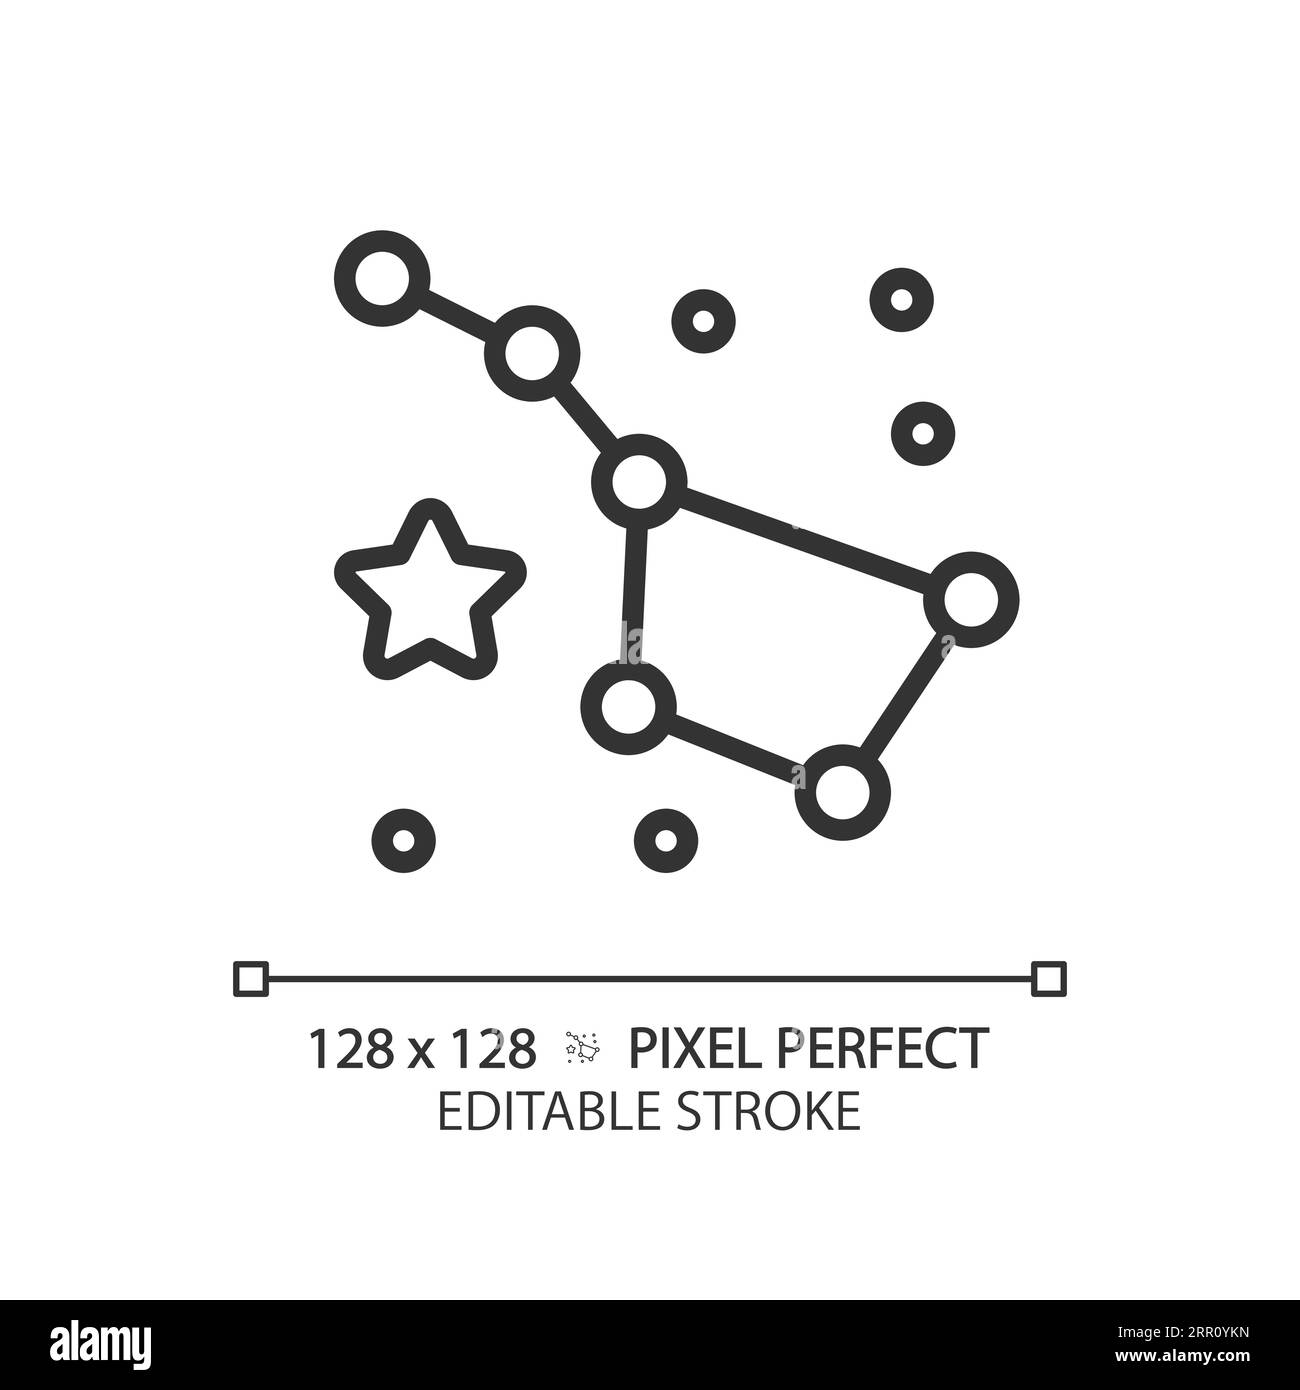 Constellation pixel perfect linear icon Stock Vector